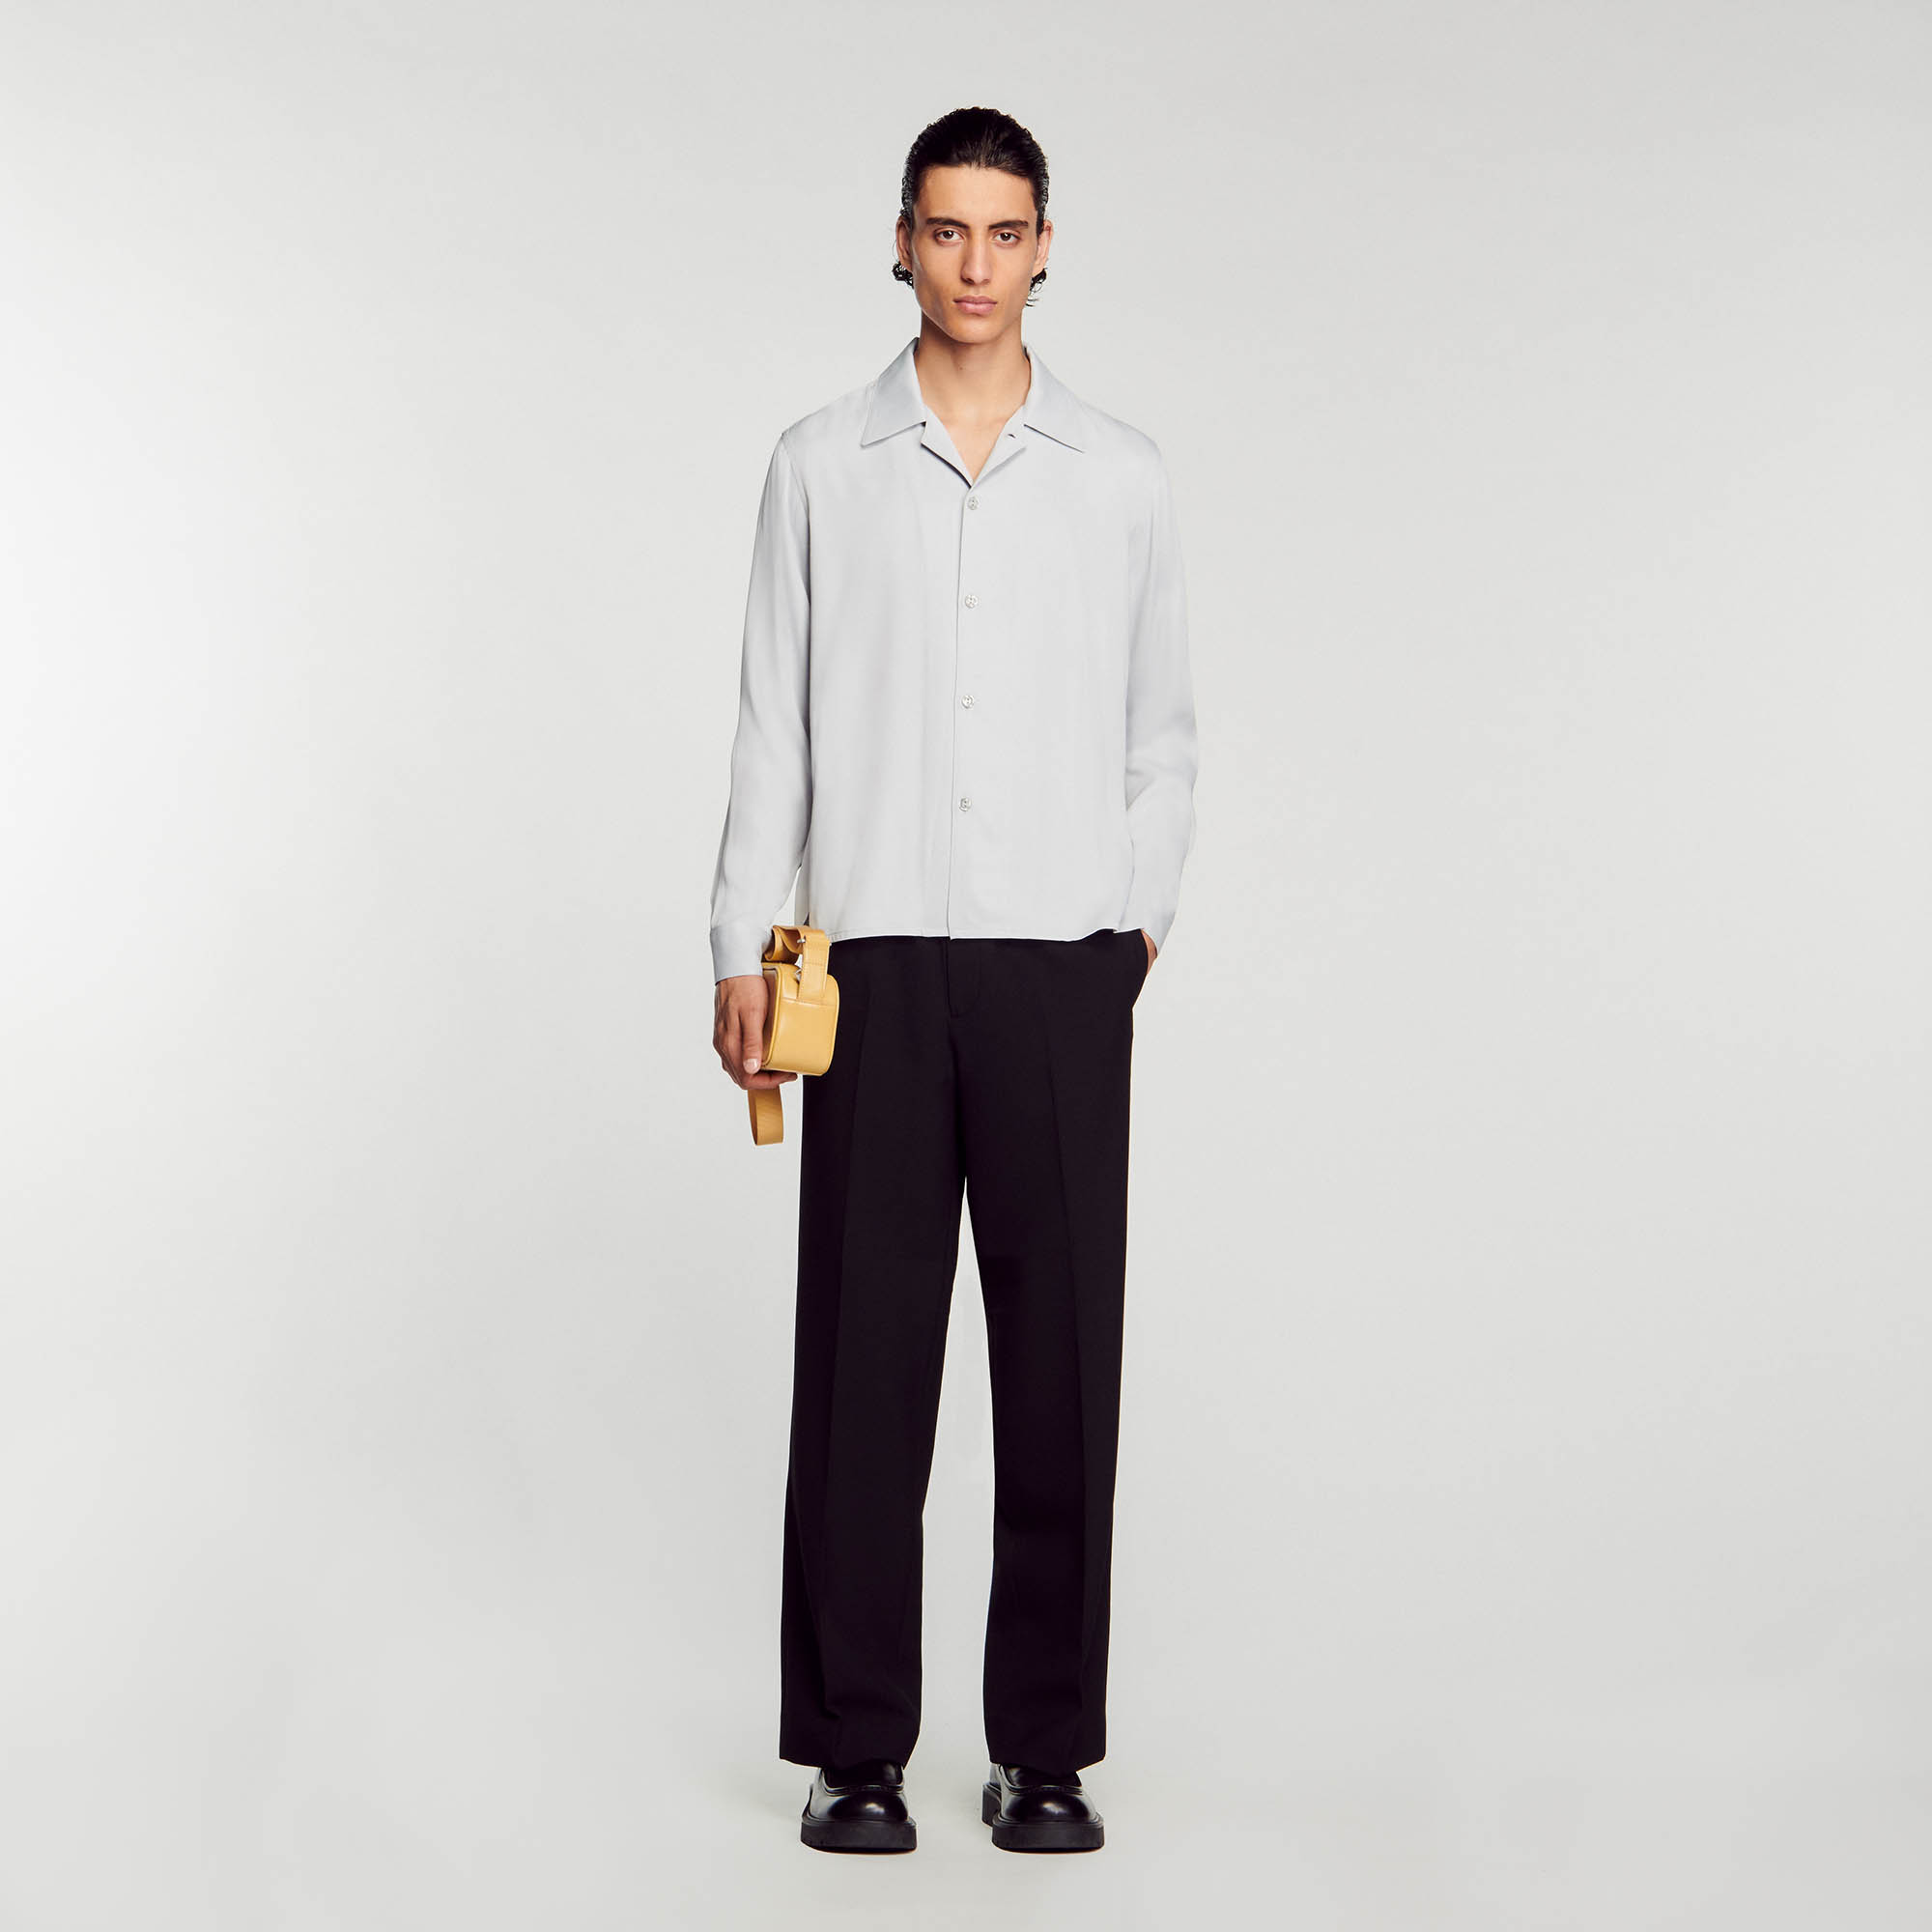 Sandro acetate Flowing shirt with a spread collar, long sleeves, and a button fastening